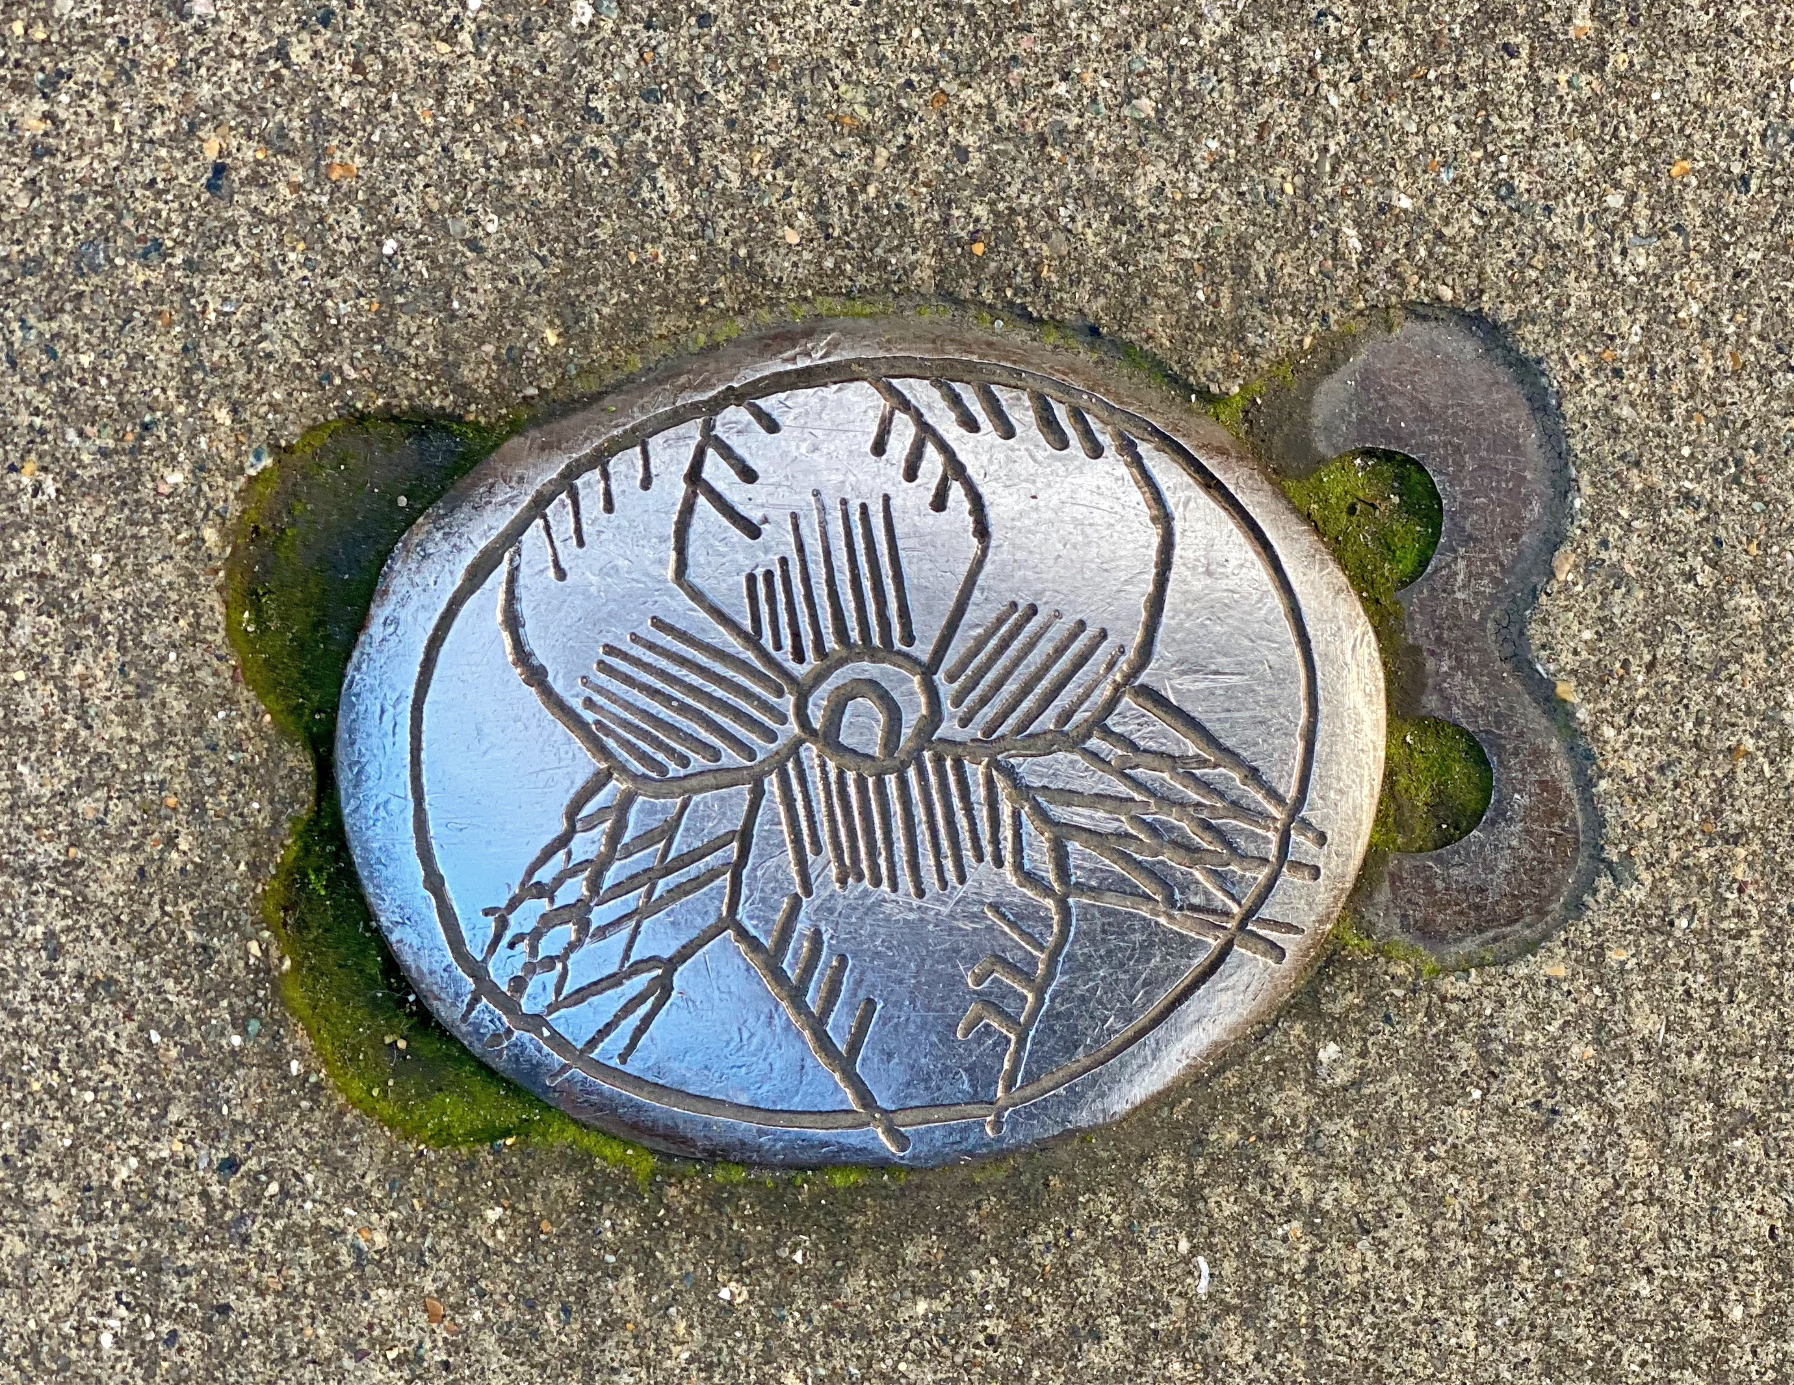 A silver token engraved with a flower gathers moss on Marchmont Street, a marker of history, unnoticed by most passersby. (Image © Joyce McGreevy)